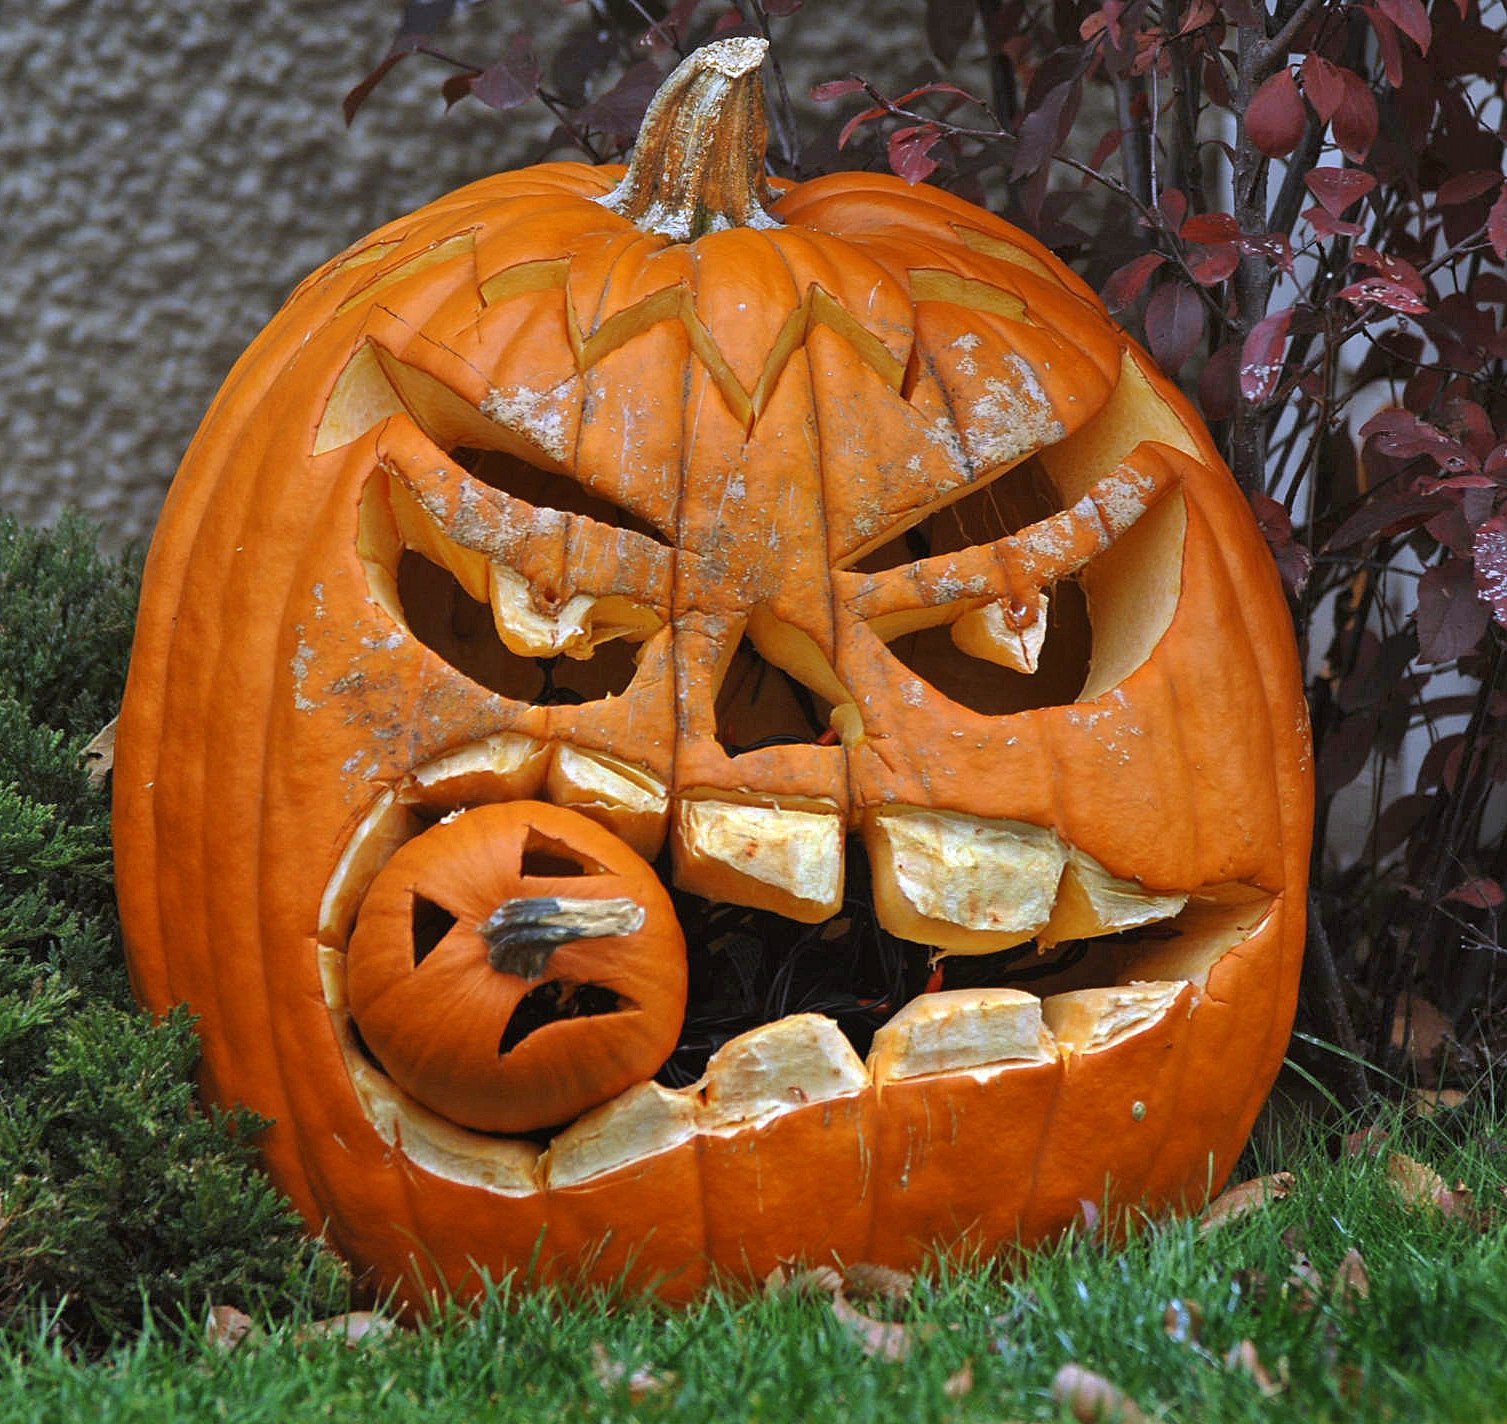 a pumpkin with carvings on it is in the grass